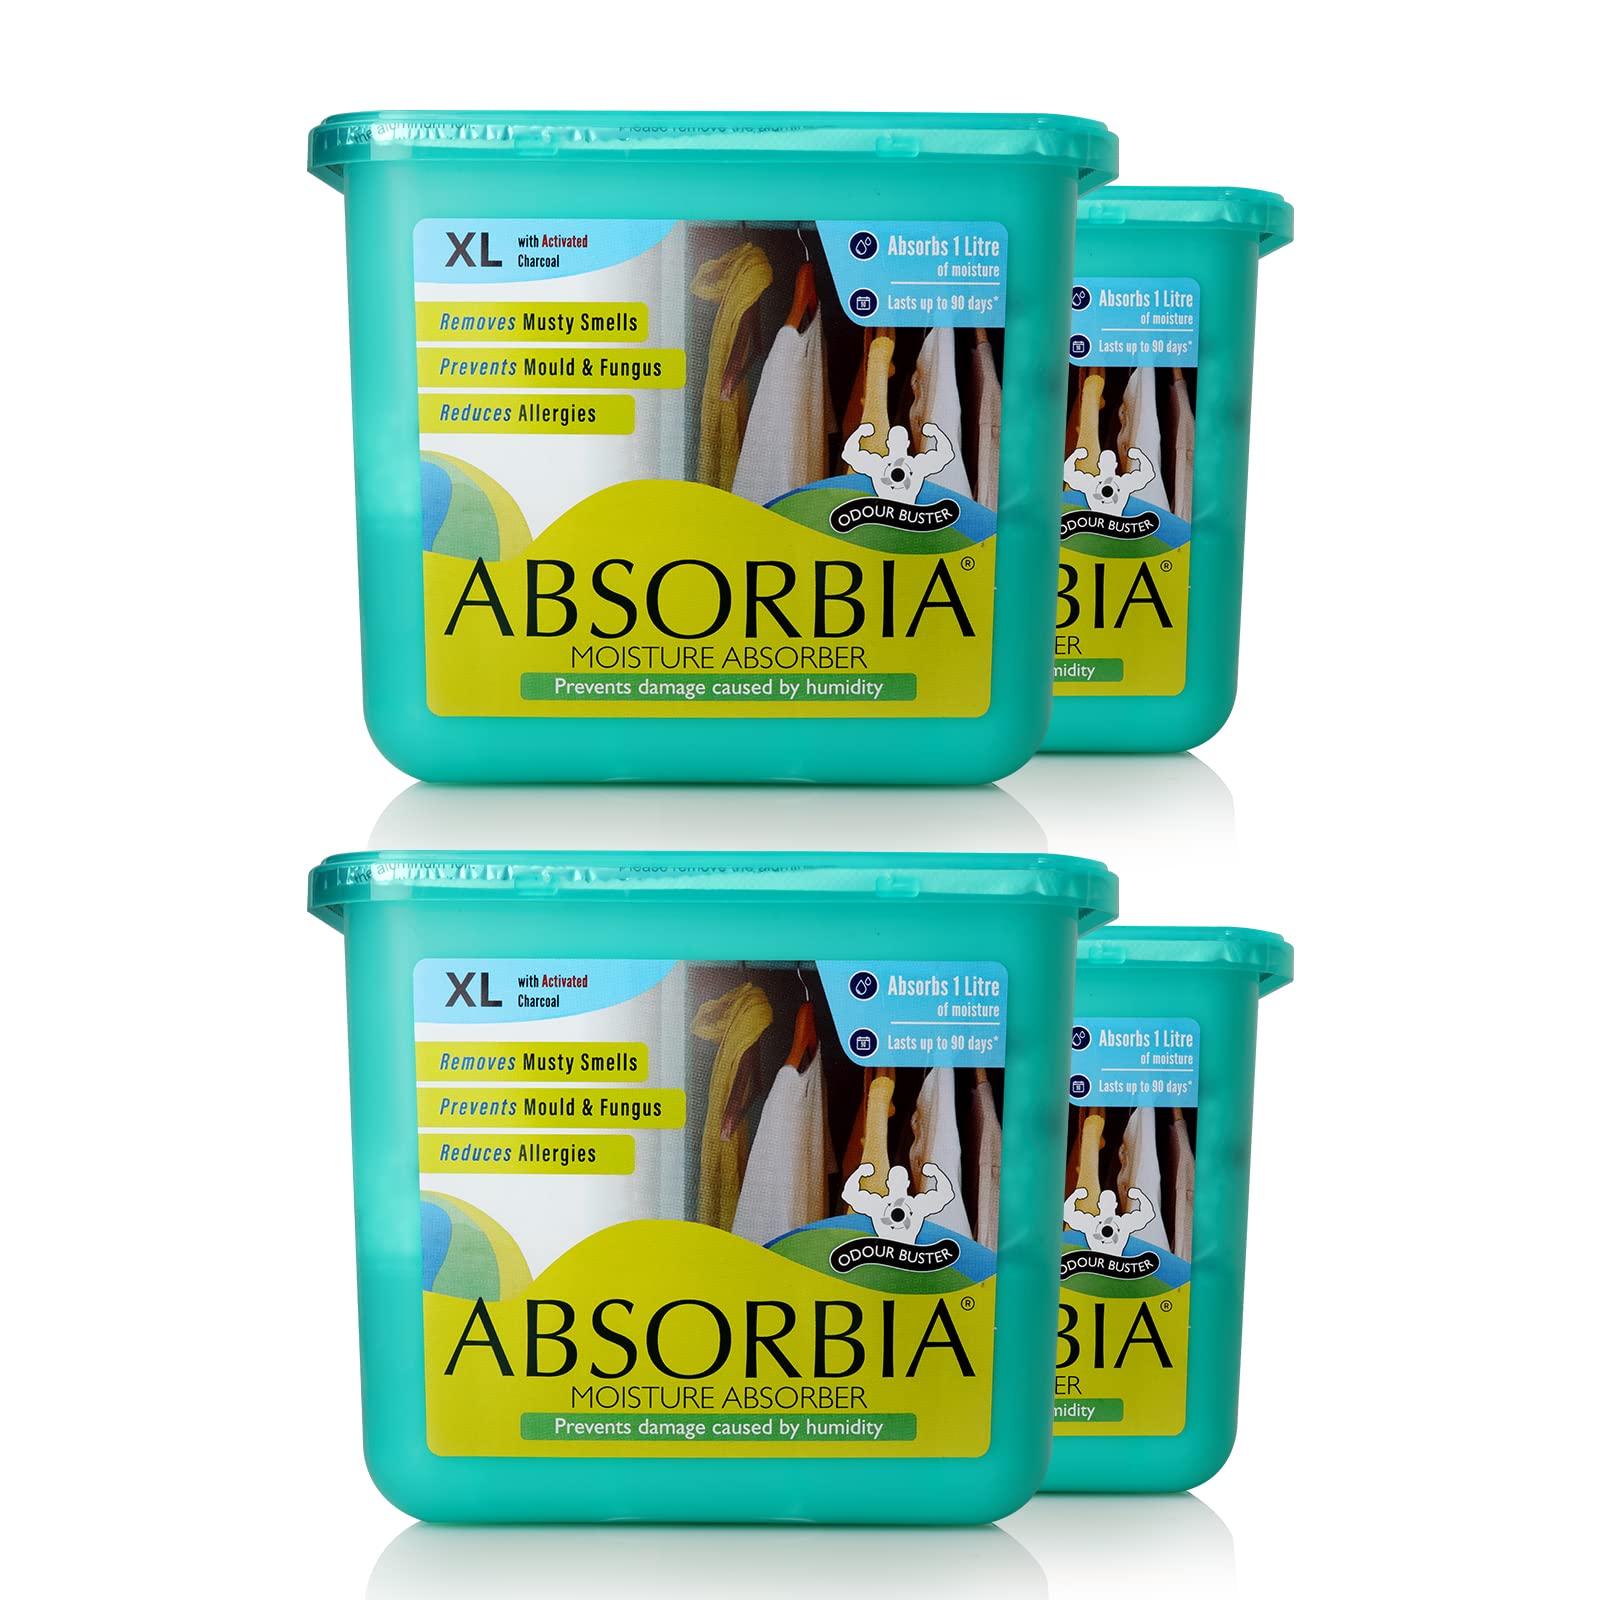 Absorbia Moisture Absorber XL with Activated Charcoal | Pack of 4 (450 g X 4 boxes) | 1L Absorbs|Dehumidifier for Rooms & Wardrobes|Fights Against Moisture, Mould, Fungus